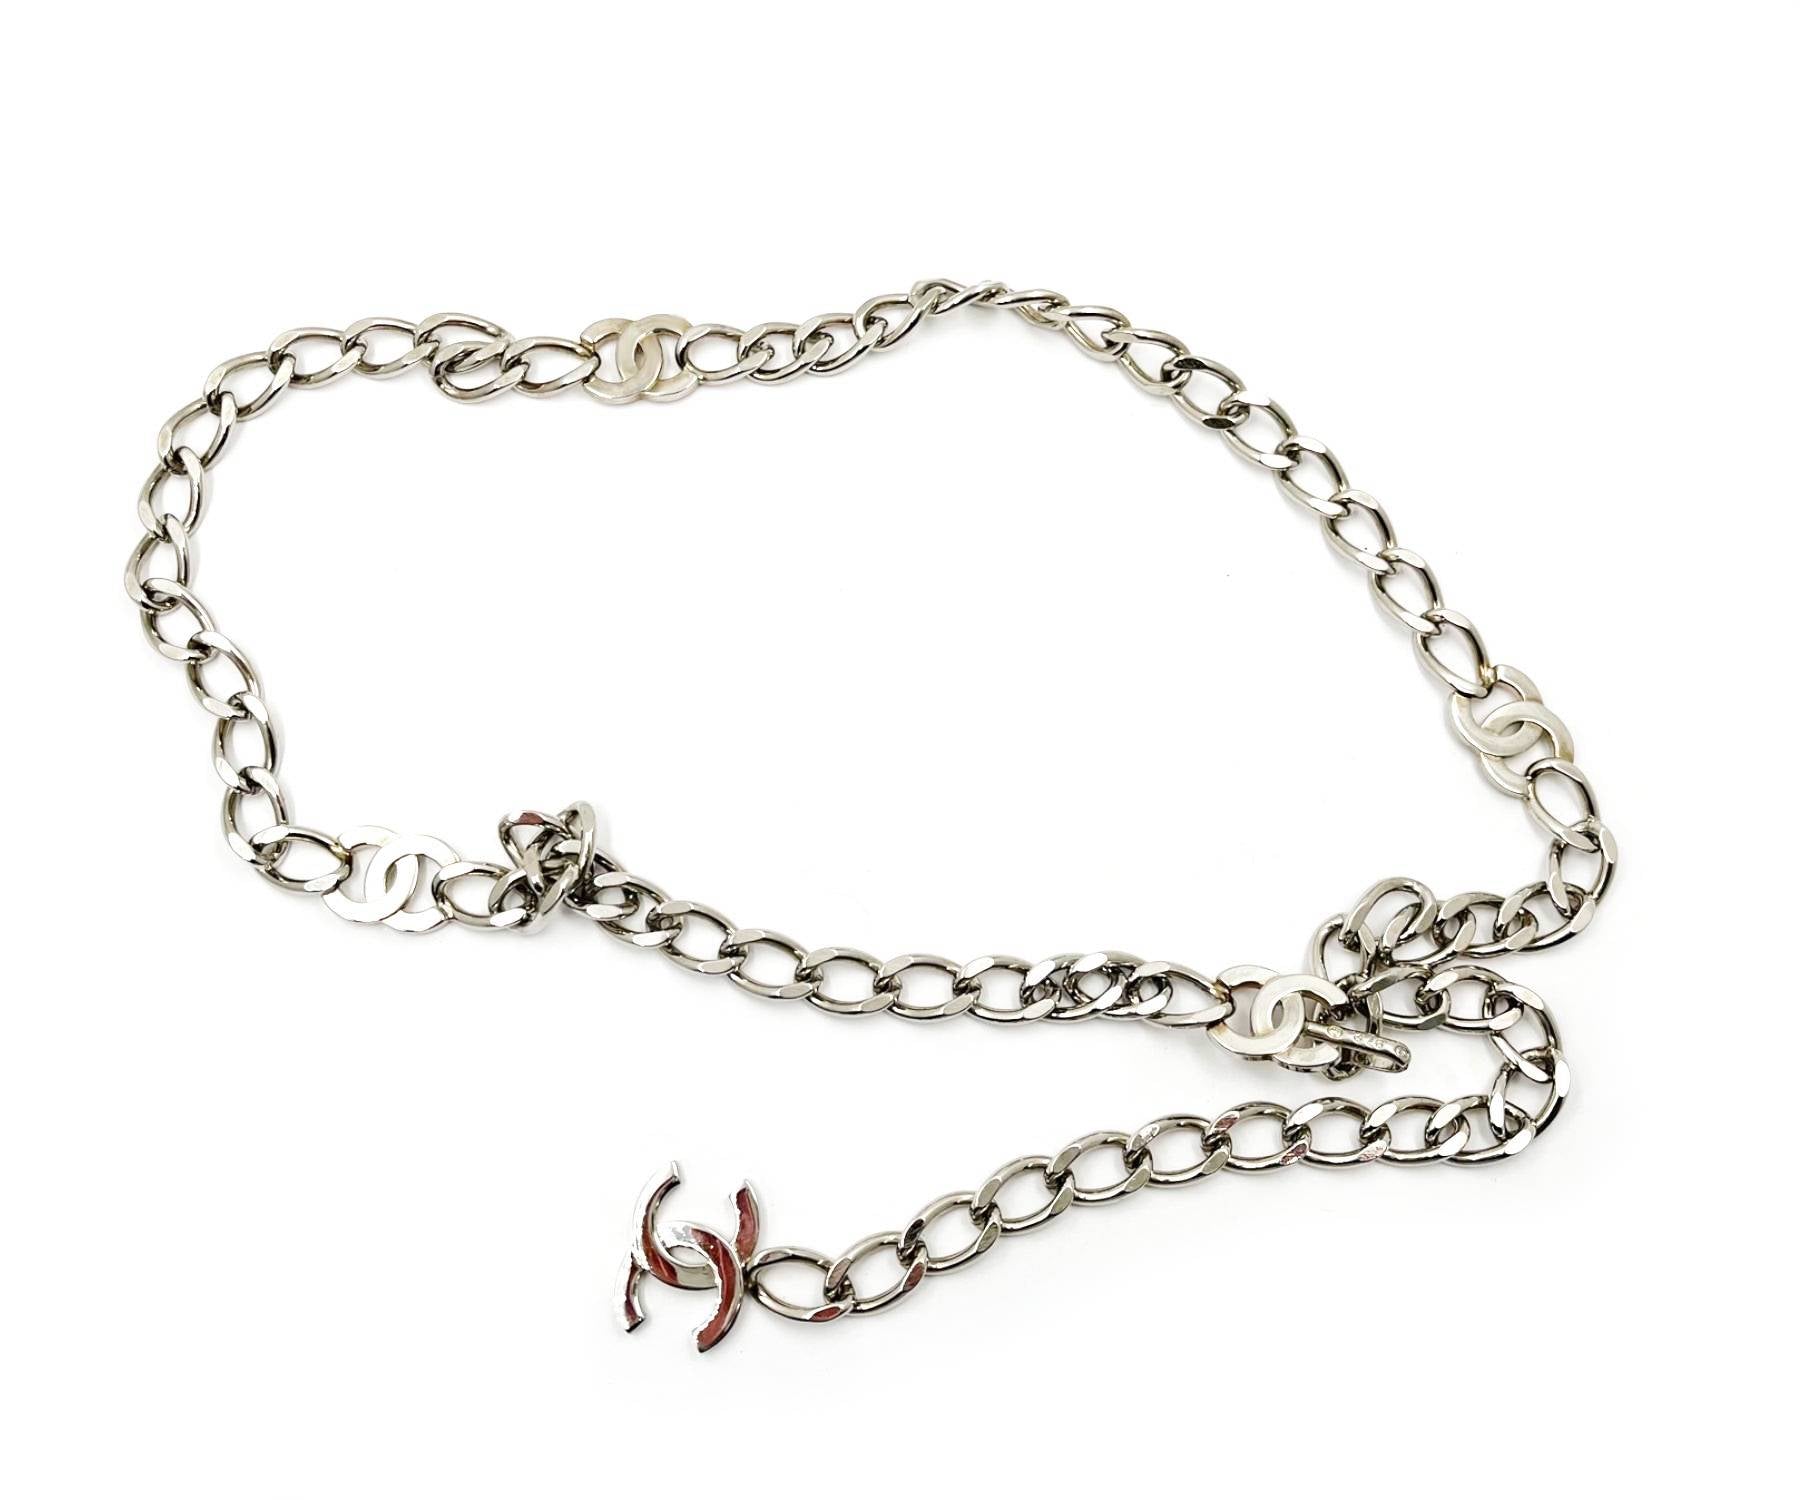 CHANEL Silver CC Chain Belt Necklace